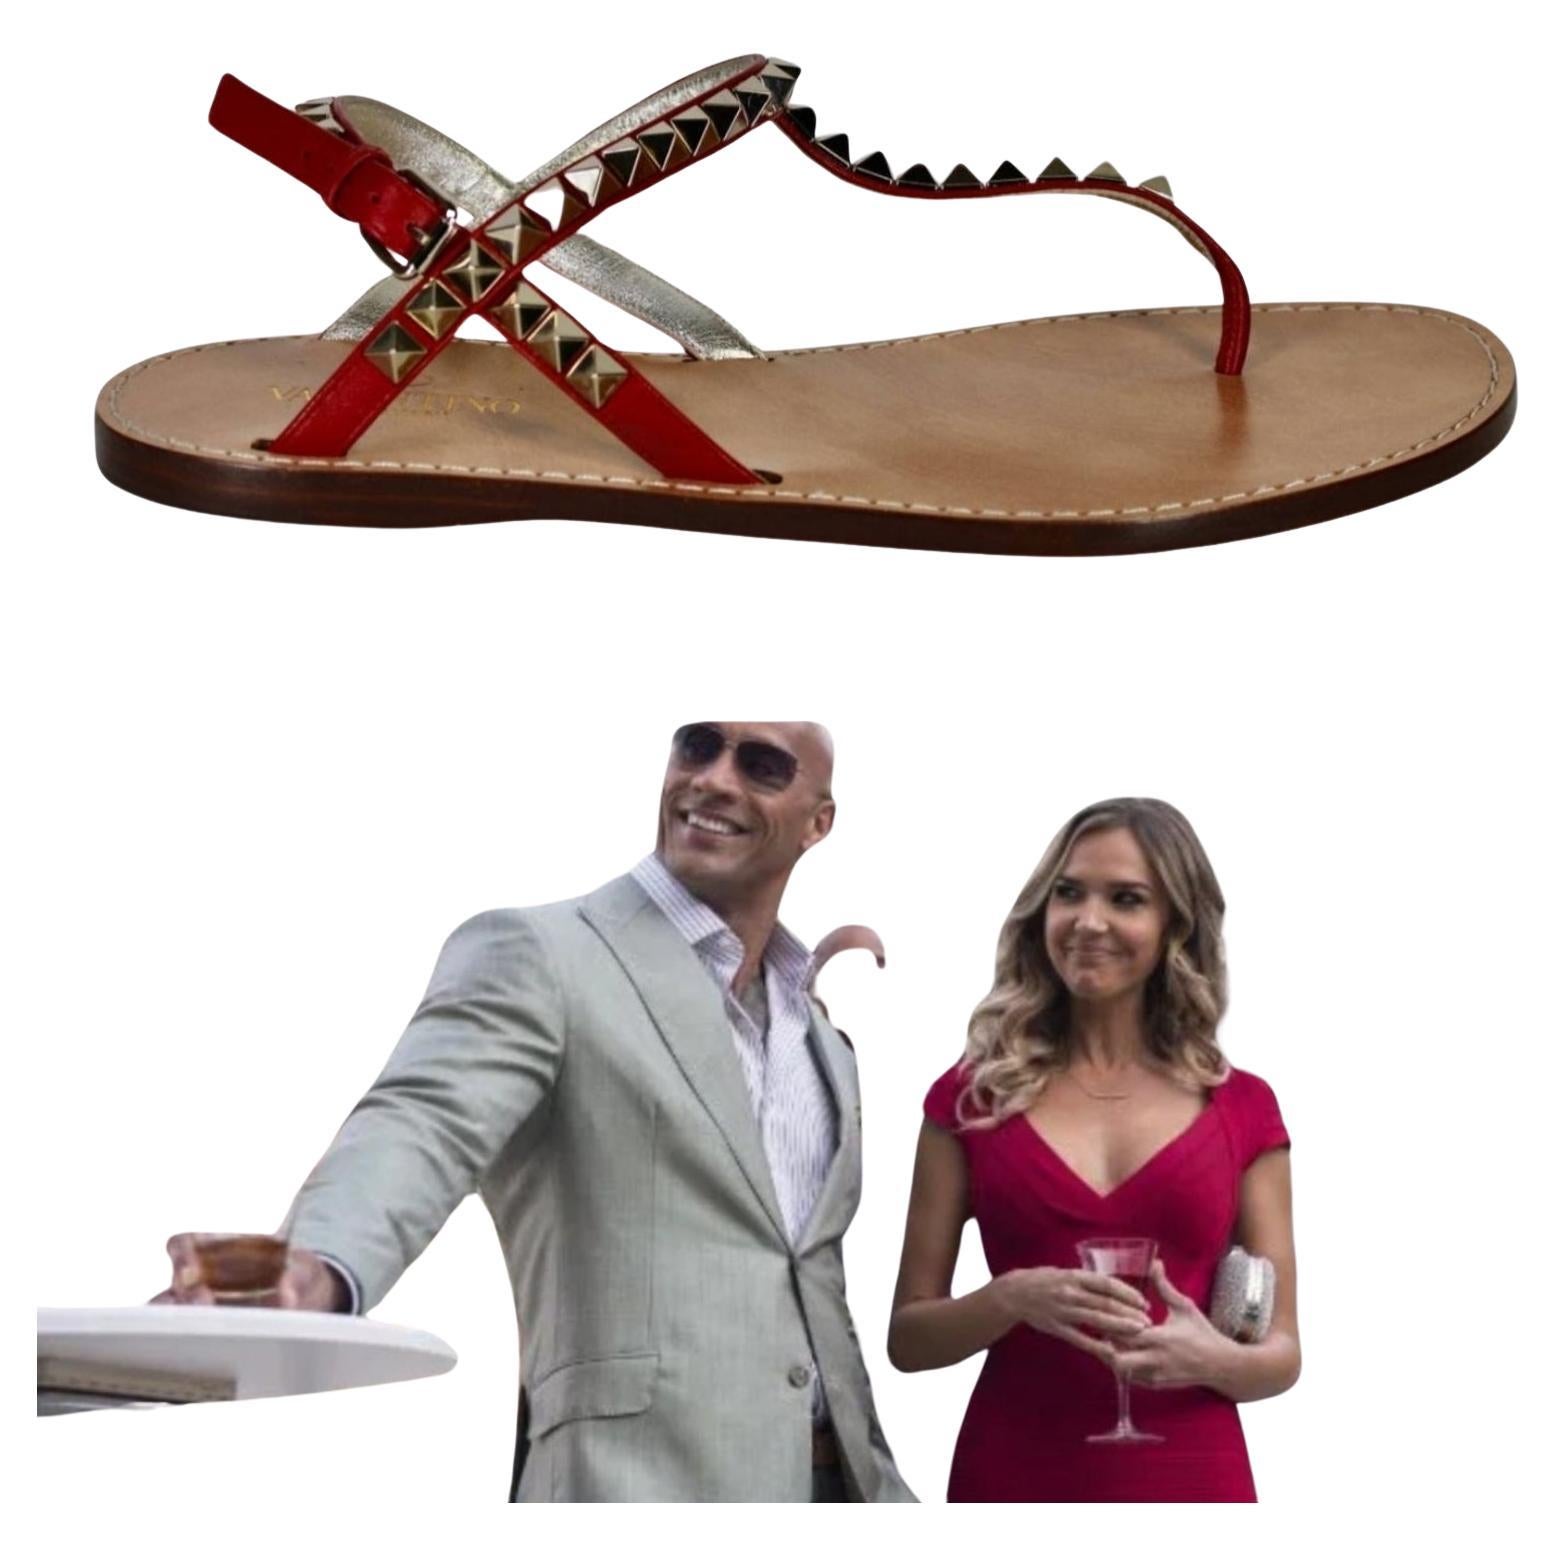 Valentino Rockstud Sandals Worn by Arielle Kebbel, Tracy in HBO's Ballers